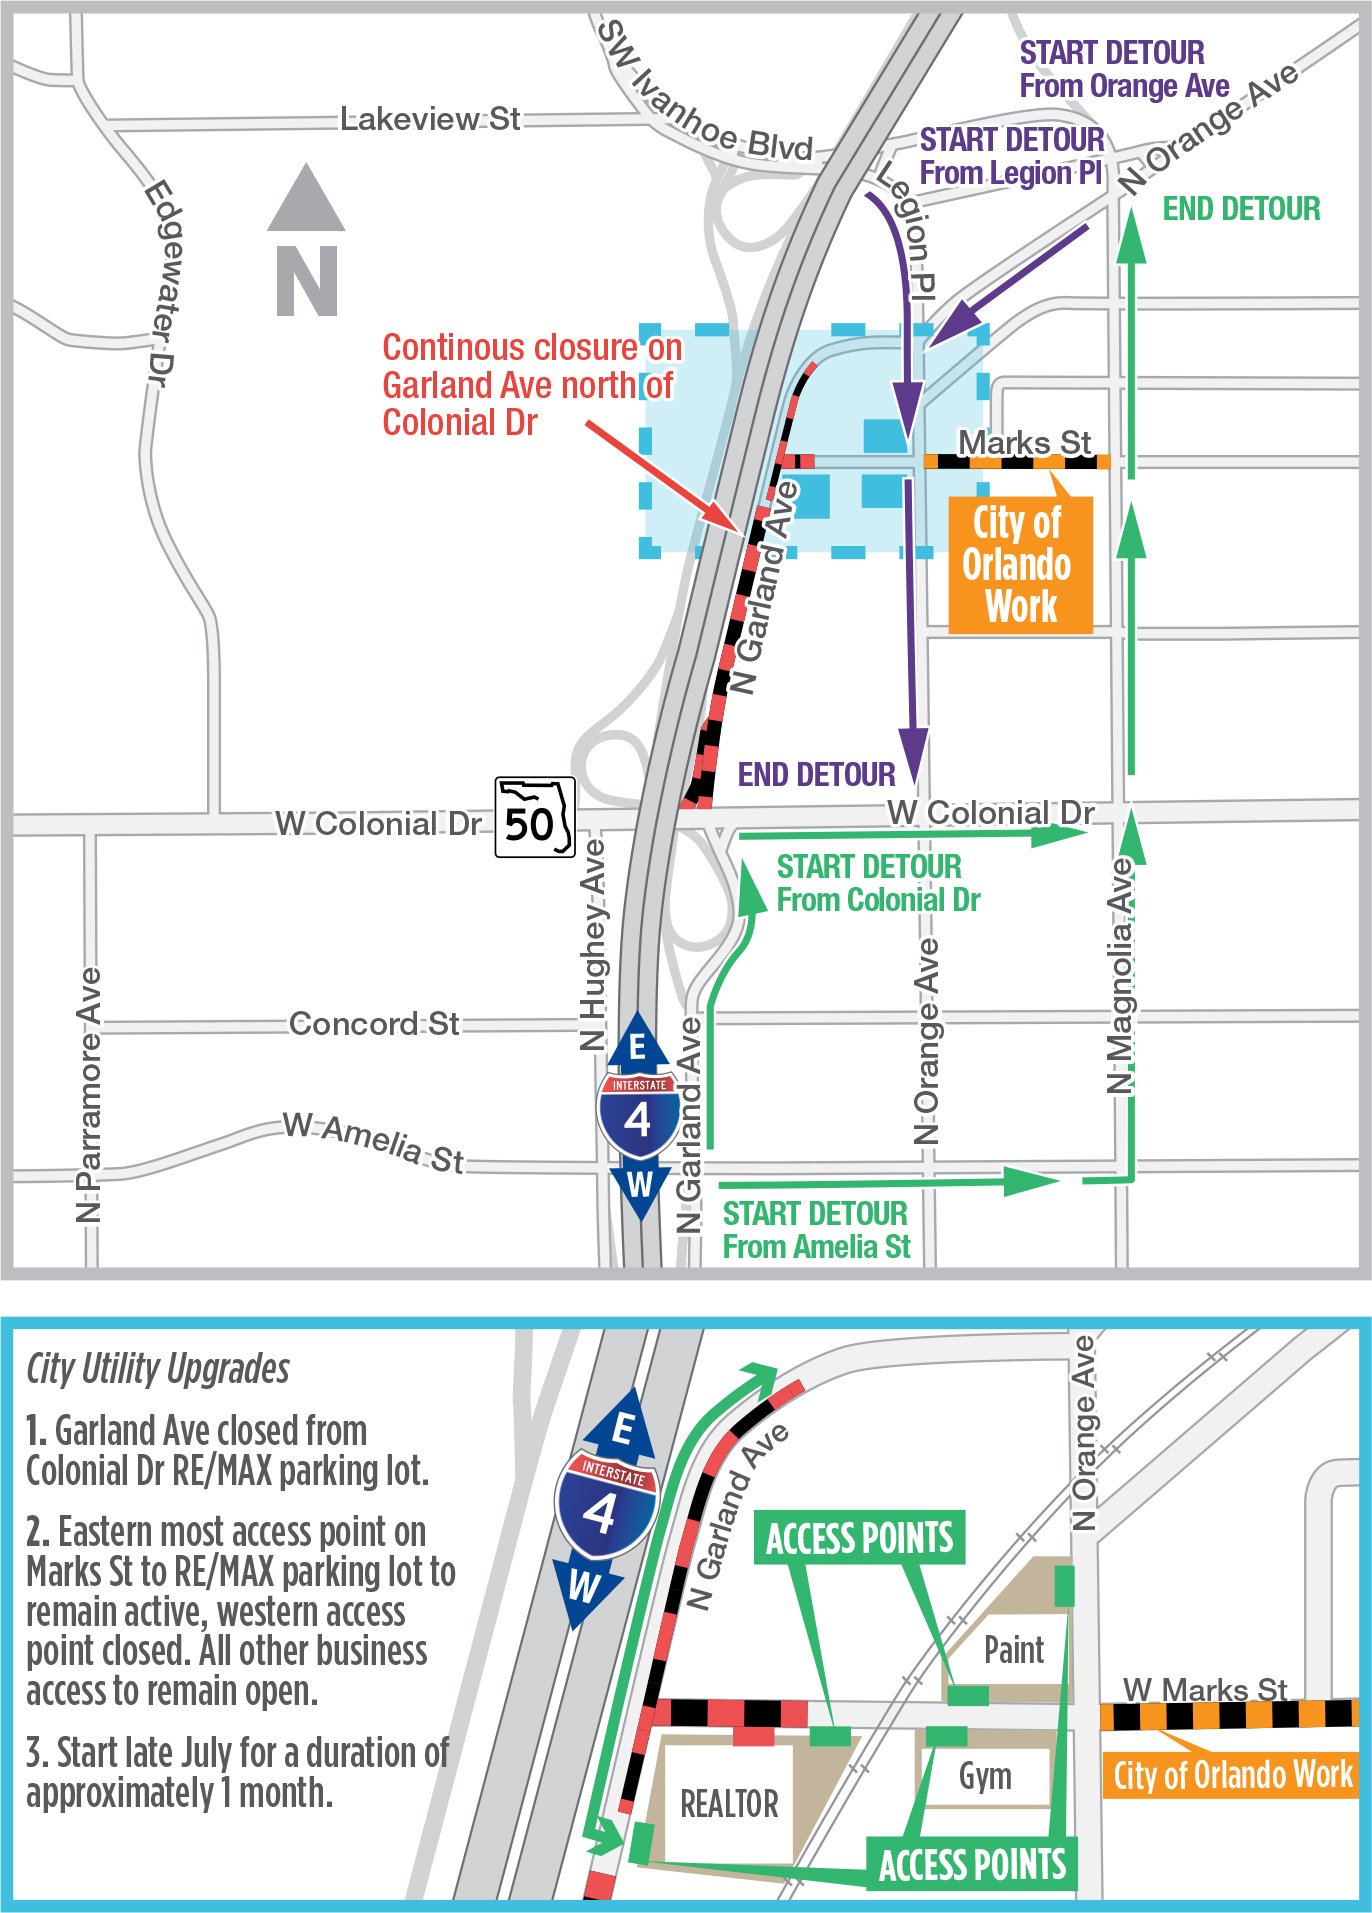 Marks Street at Garland Avenue Closing For Six Weeks | I-4 Ultimate